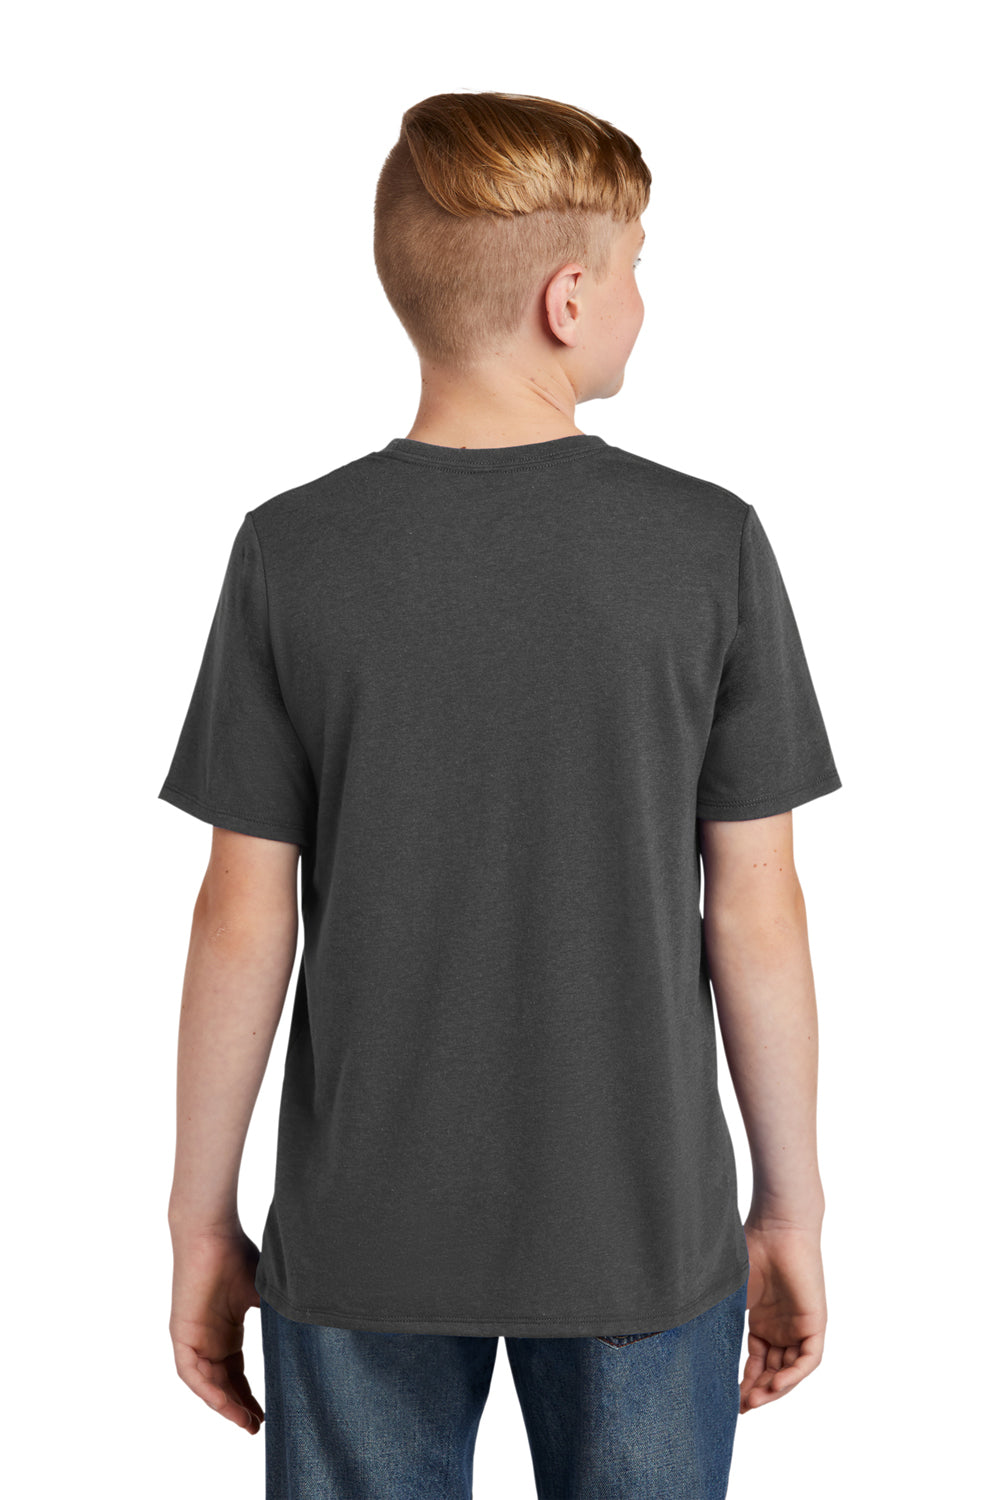 District DT130Y Youth Perfect Tri Short Sleeve Crewneck T-Shirt Charcoal Grey Back